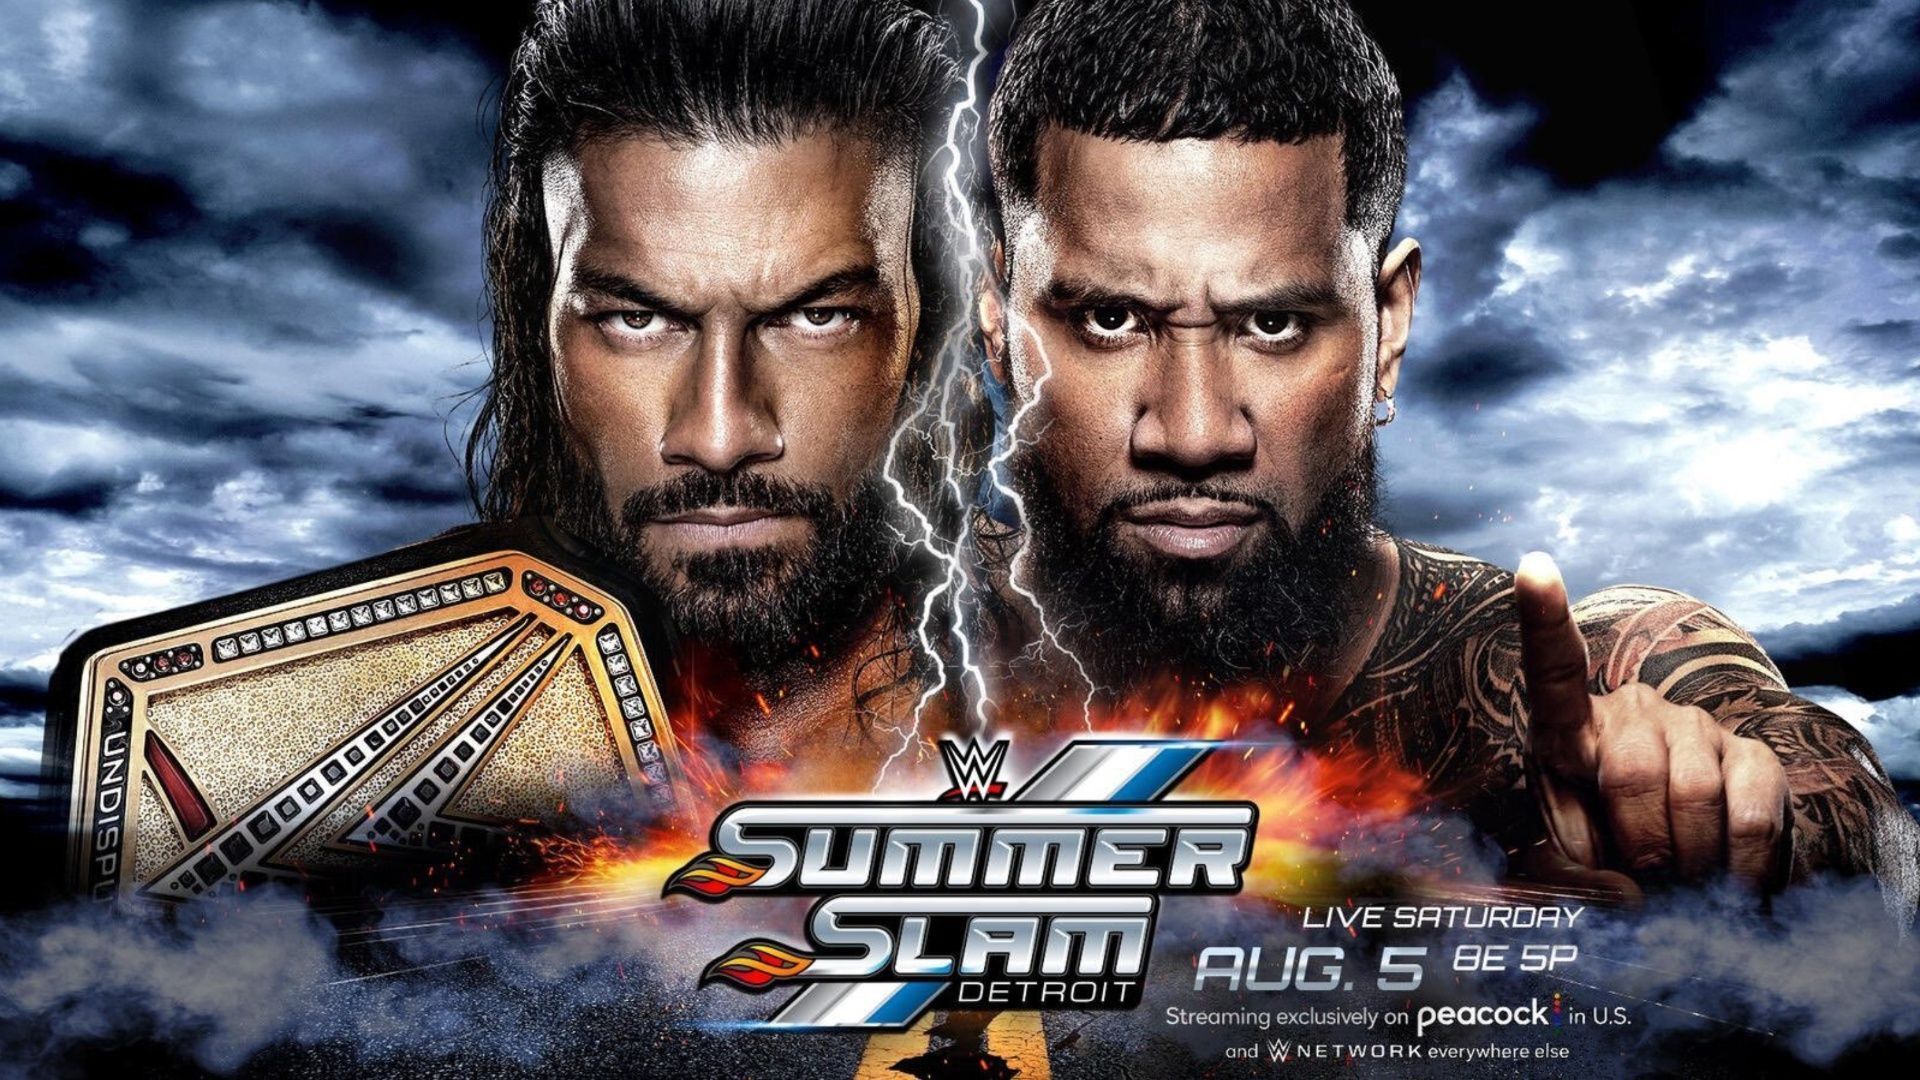 Official poster for Roman Reigns vs. Jey Uso at SummerSlam 2023.